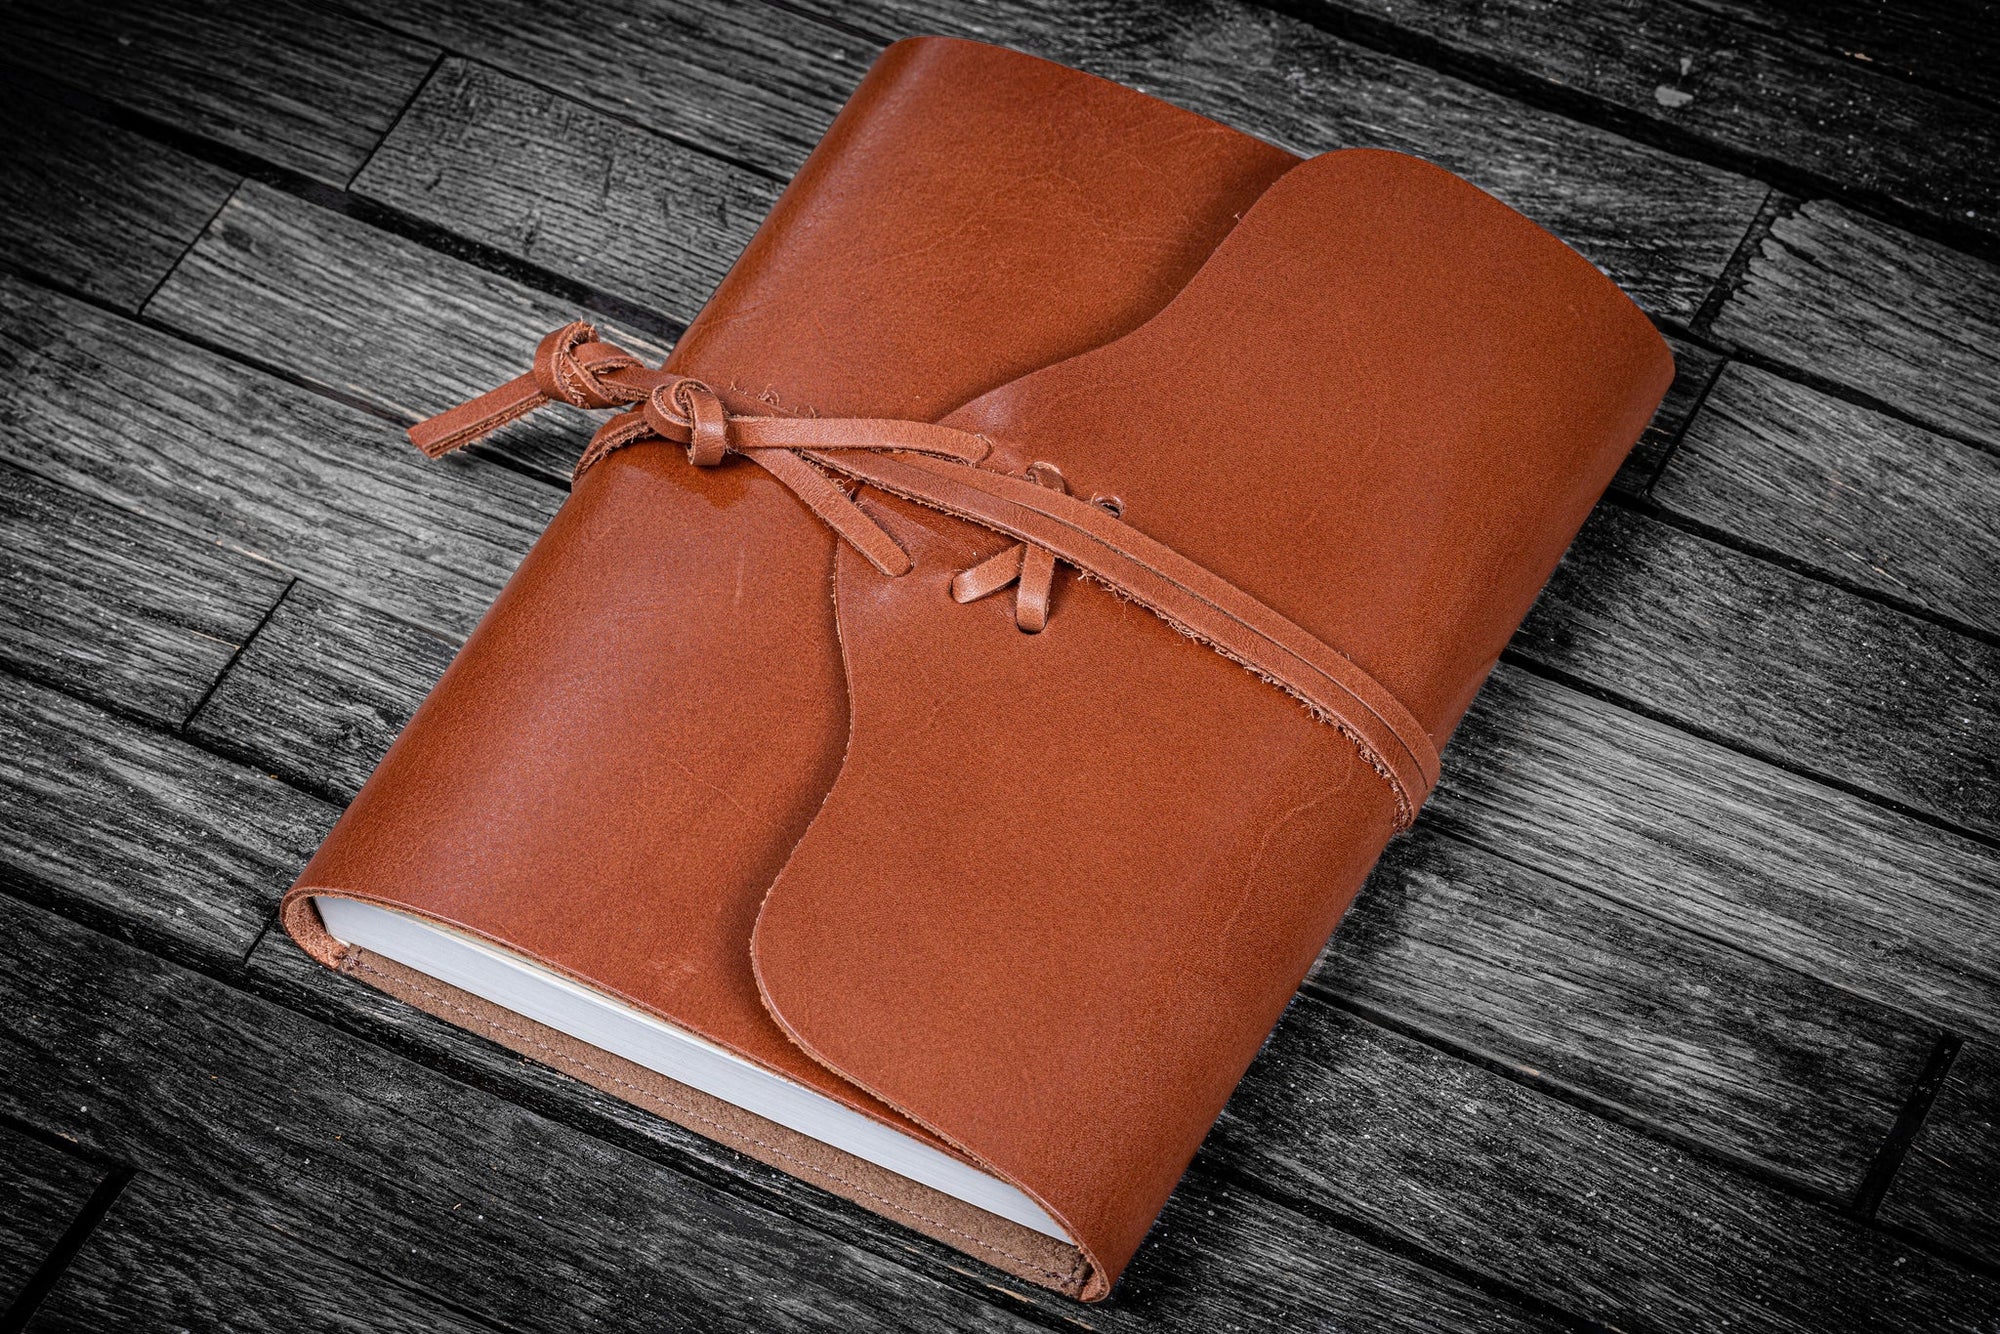 Galen Leather - Refillable Leather Wrap Journal/ Planner Cover - Brown  - Blesket Canada